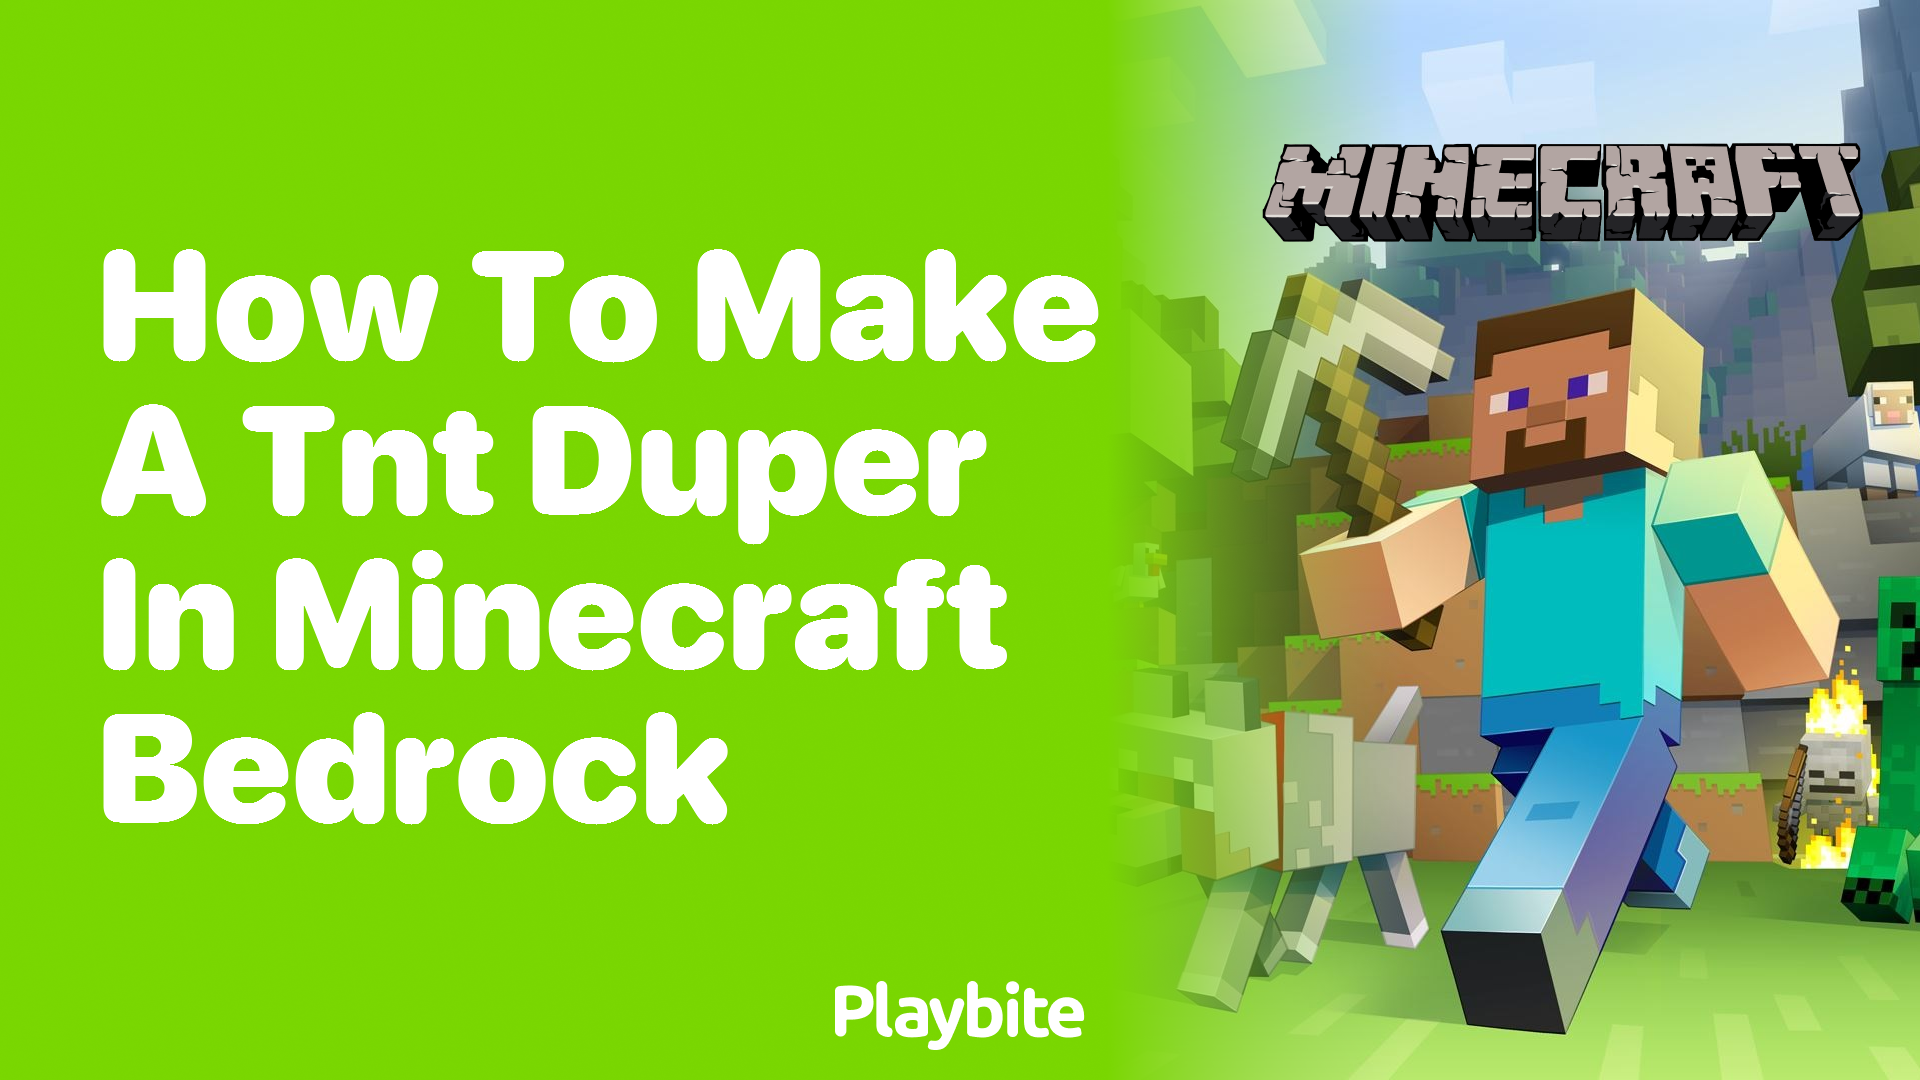 How to Make a TNT Duper in Minecraft Bedrock